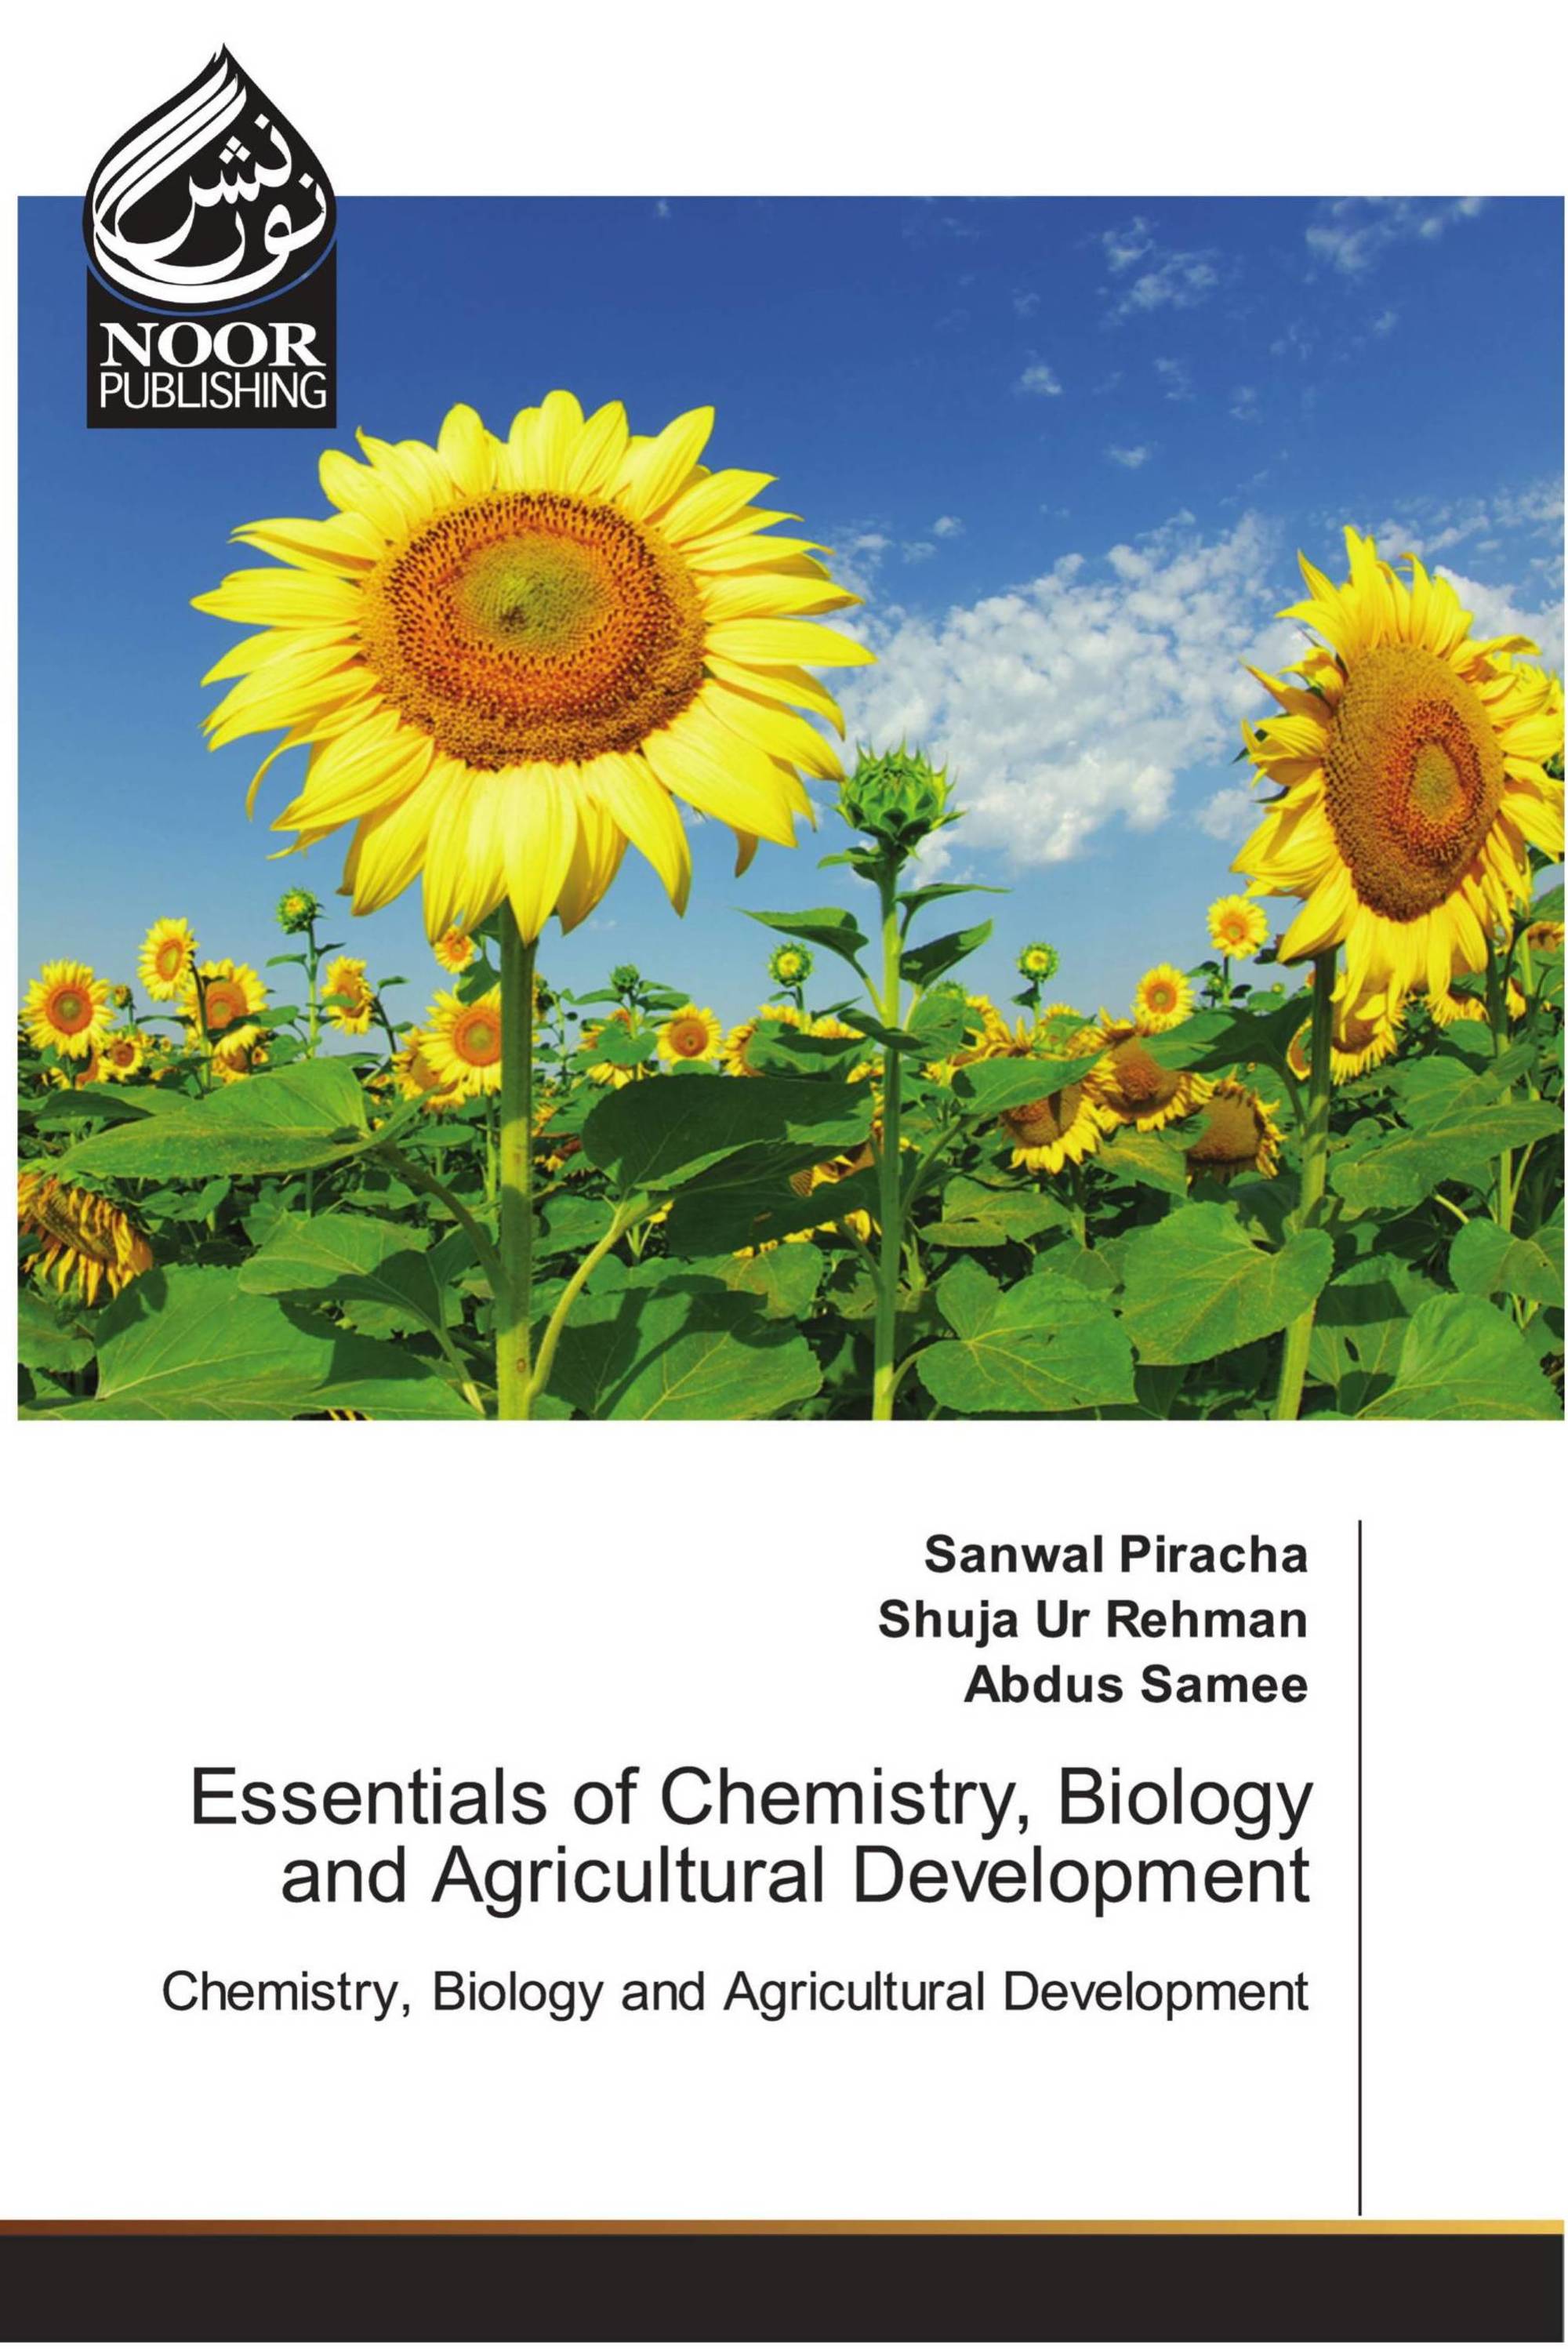 Essentials of Chemistry, Biology and Agricultural Development